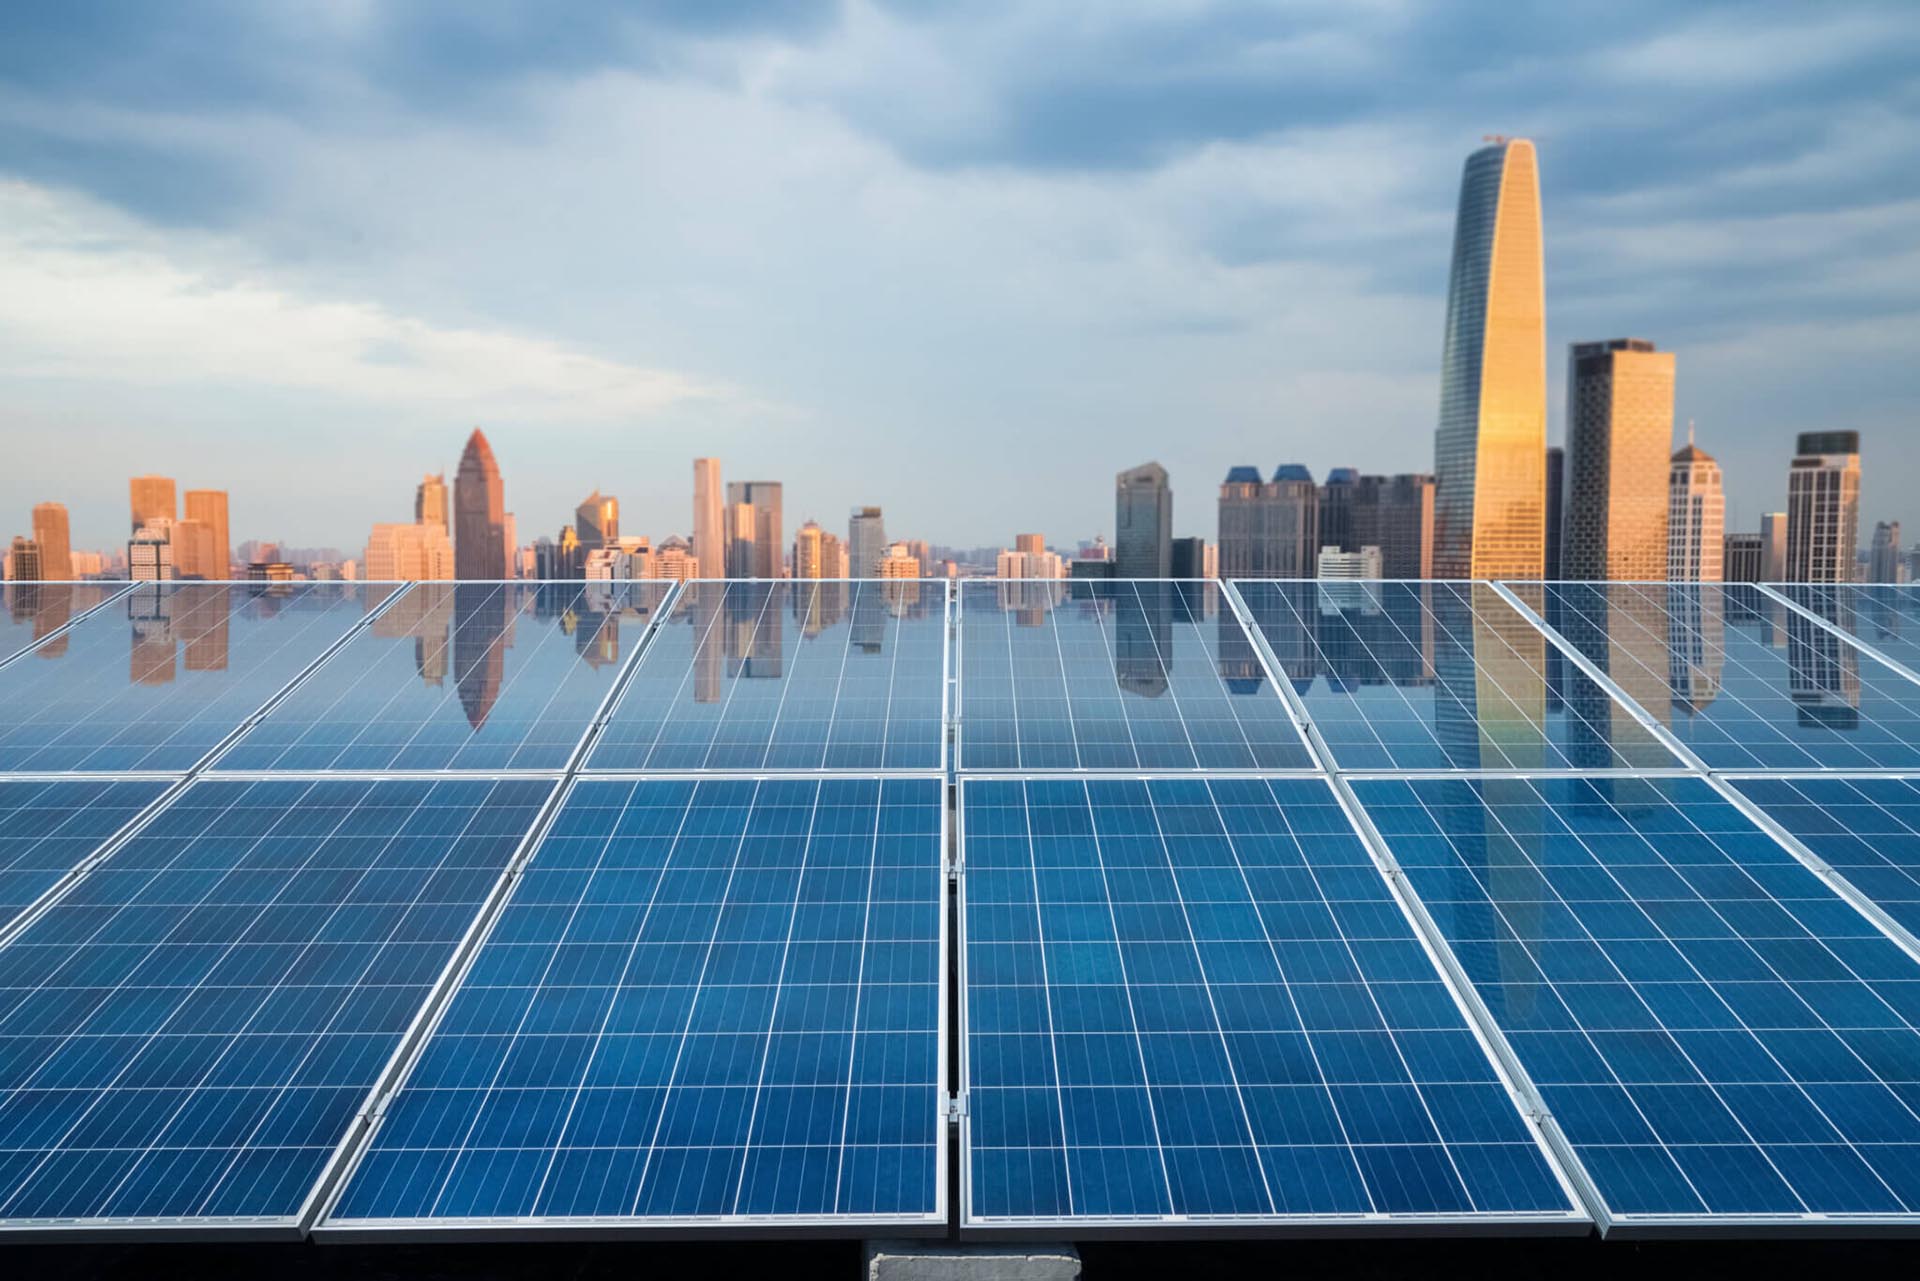 A photograph of solar panels in the foreground with a city skyline in the background.